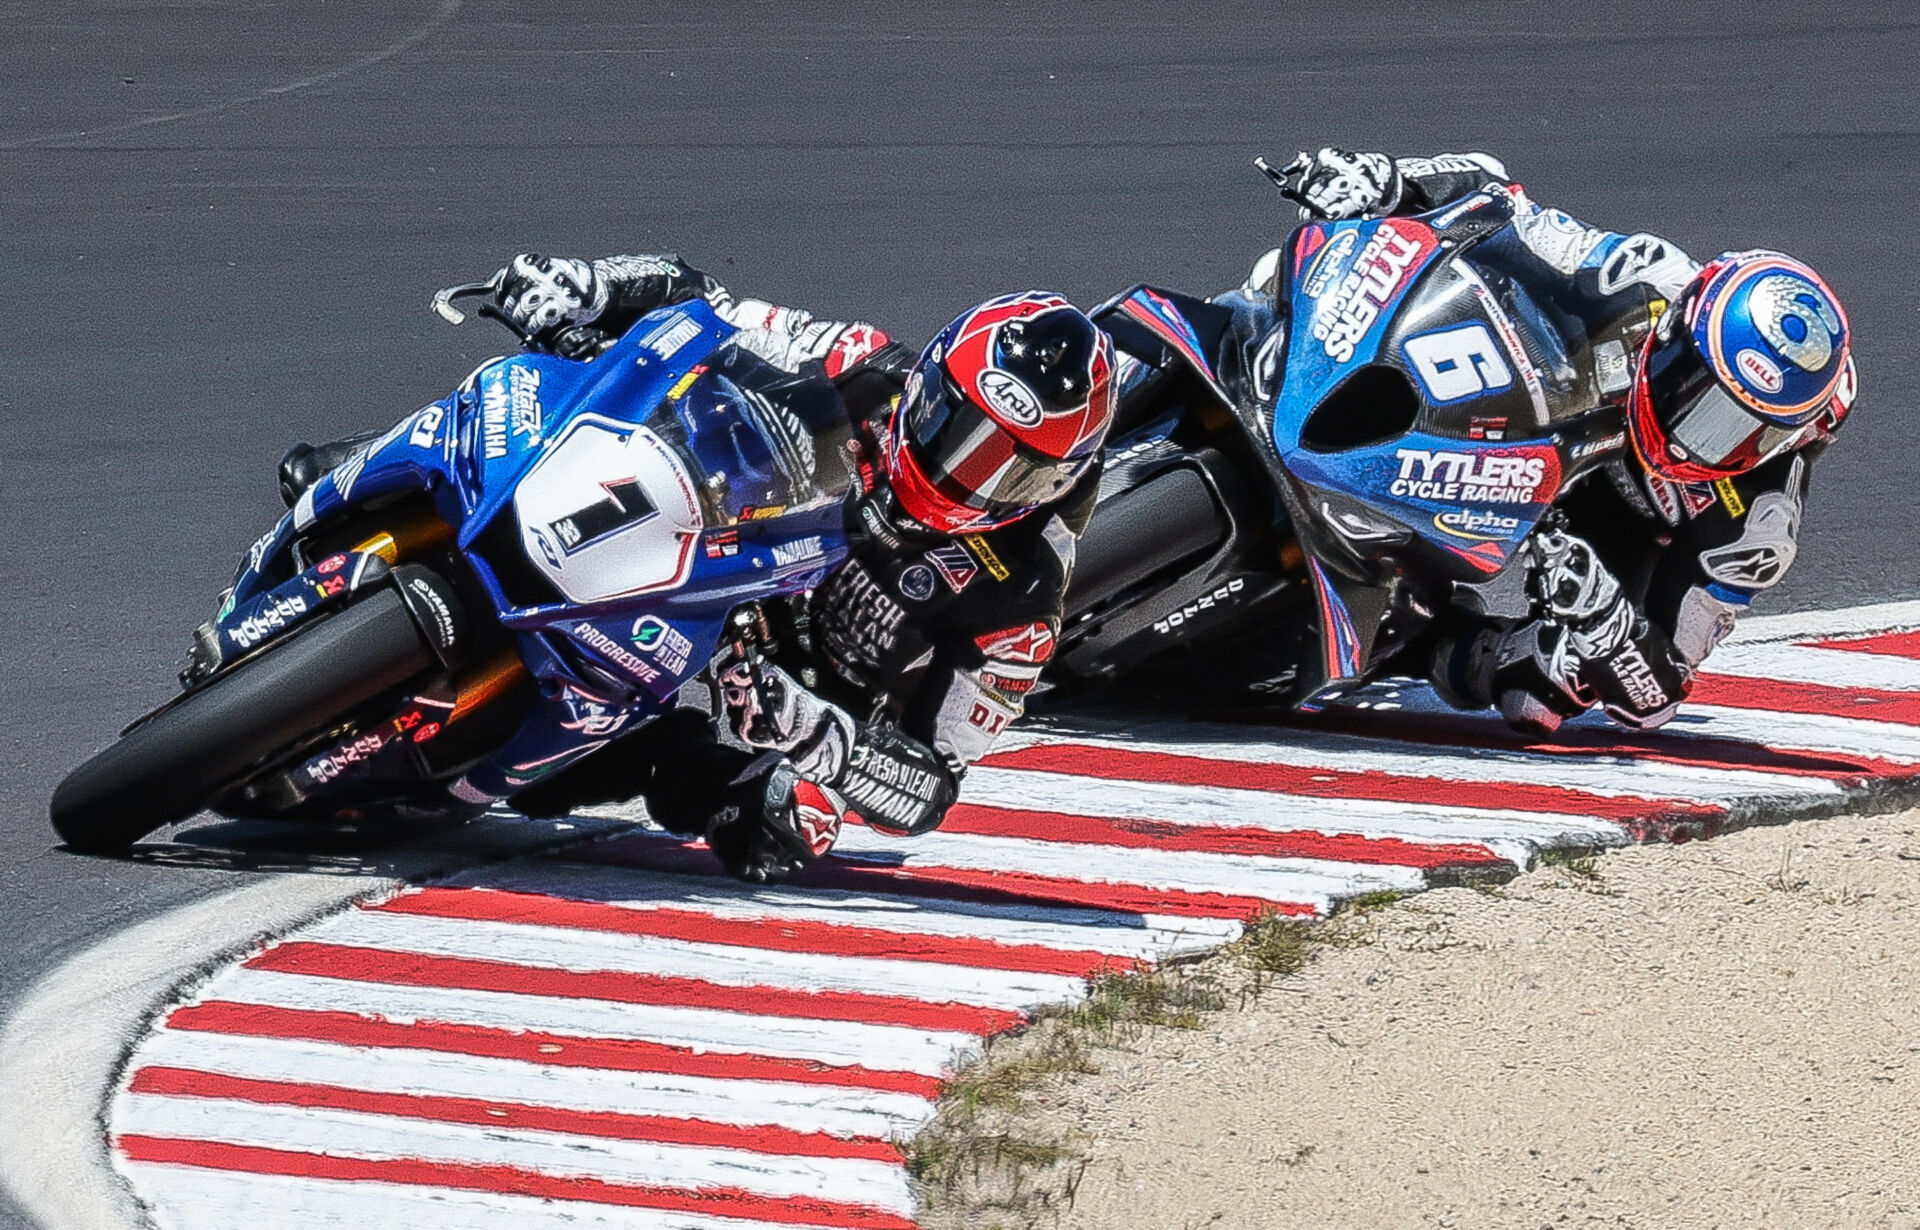 Jake Gagne (1) and Cameron Beaubier (6) are locked in an epic MotoAmerica Medallia Superbike Championship title fight. Photo by Brian J. Nelson.